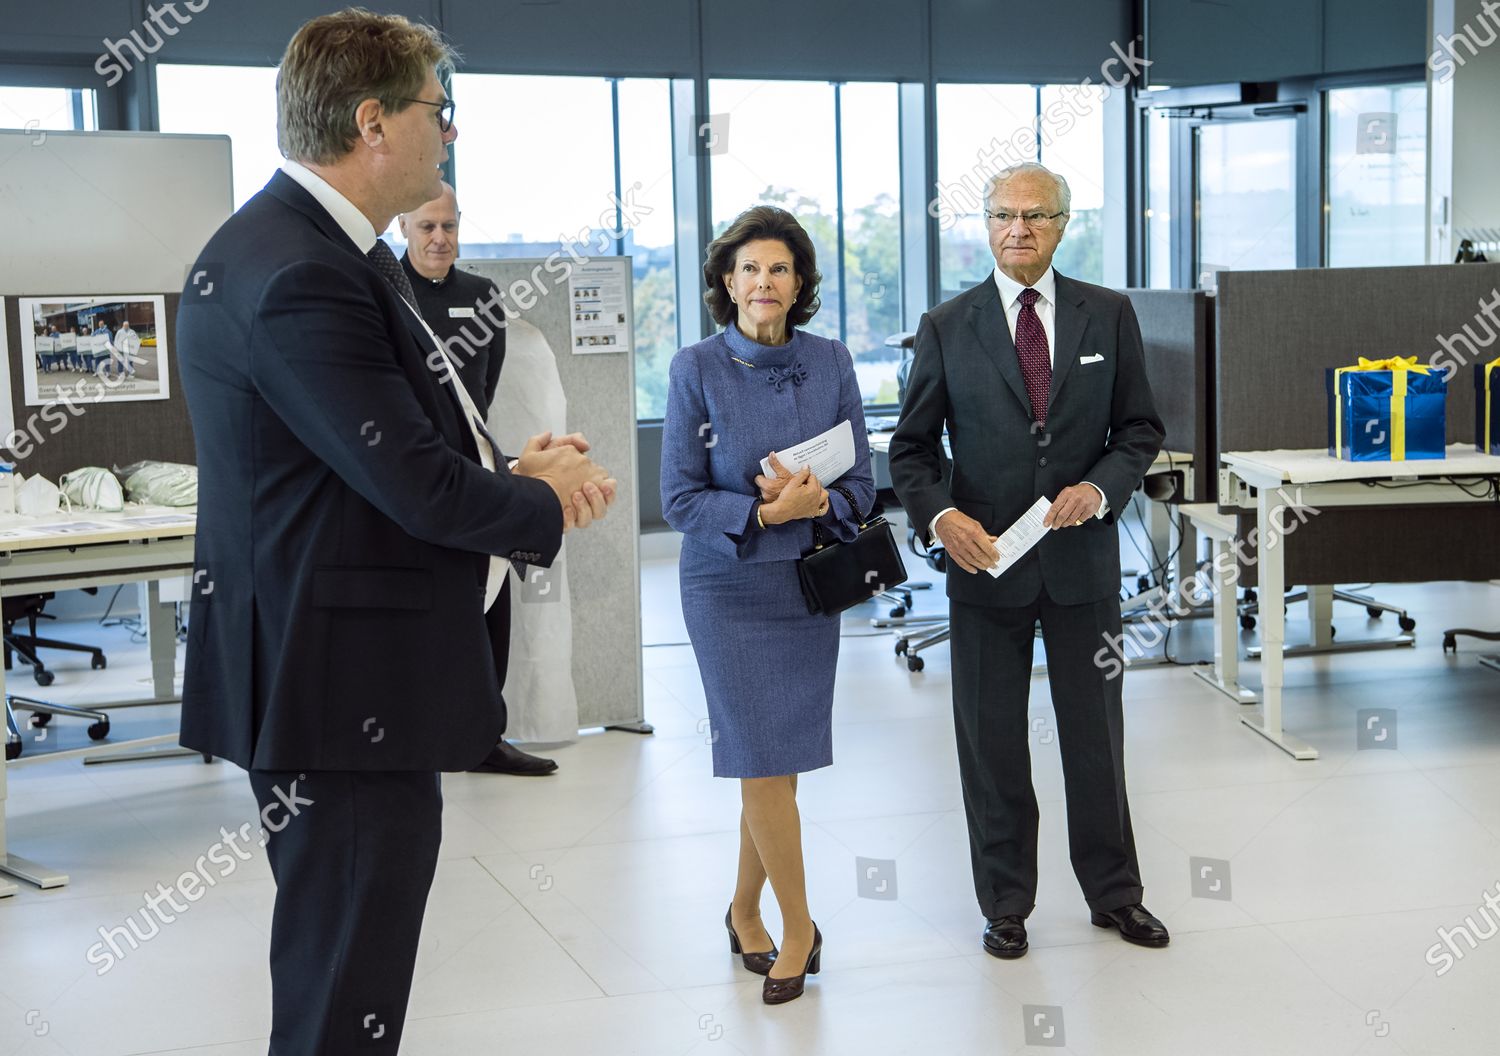 king-carl-gustaf-and-queen-silvia-visit-stockholm-county-sweden-shutterstock-editorial-10952011h.jpg